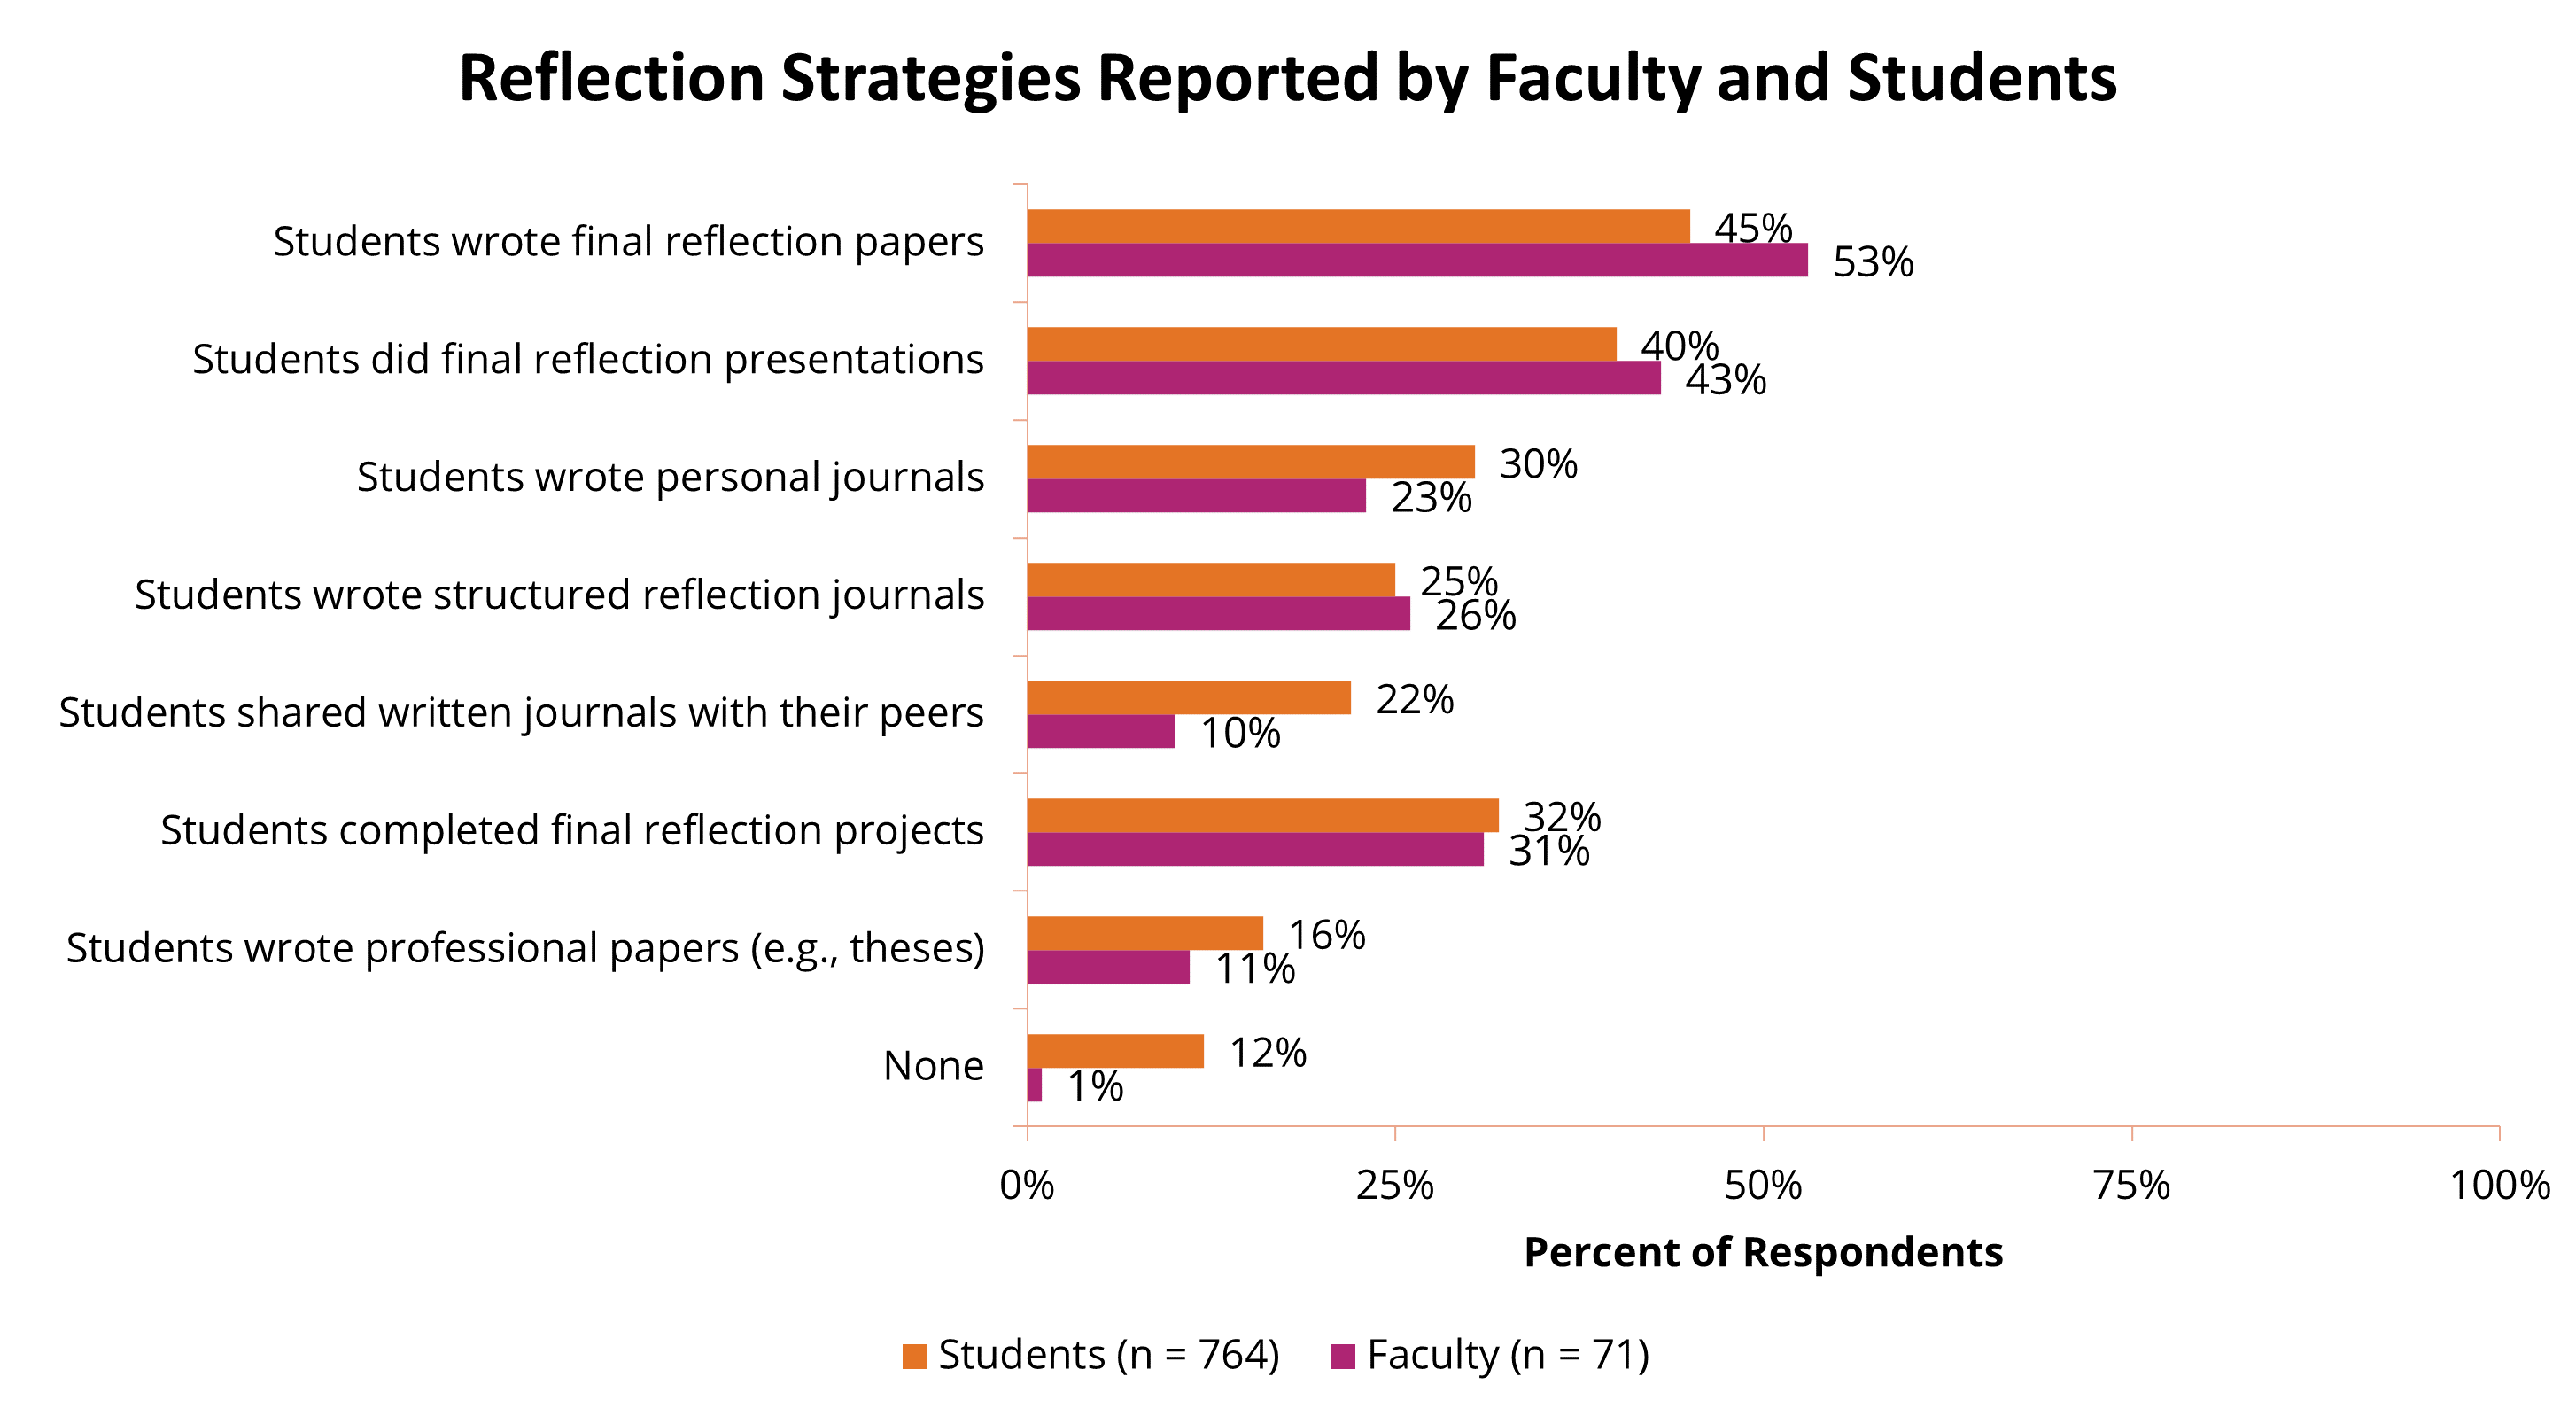 Chart showing reflection strategies reported by students and faculty